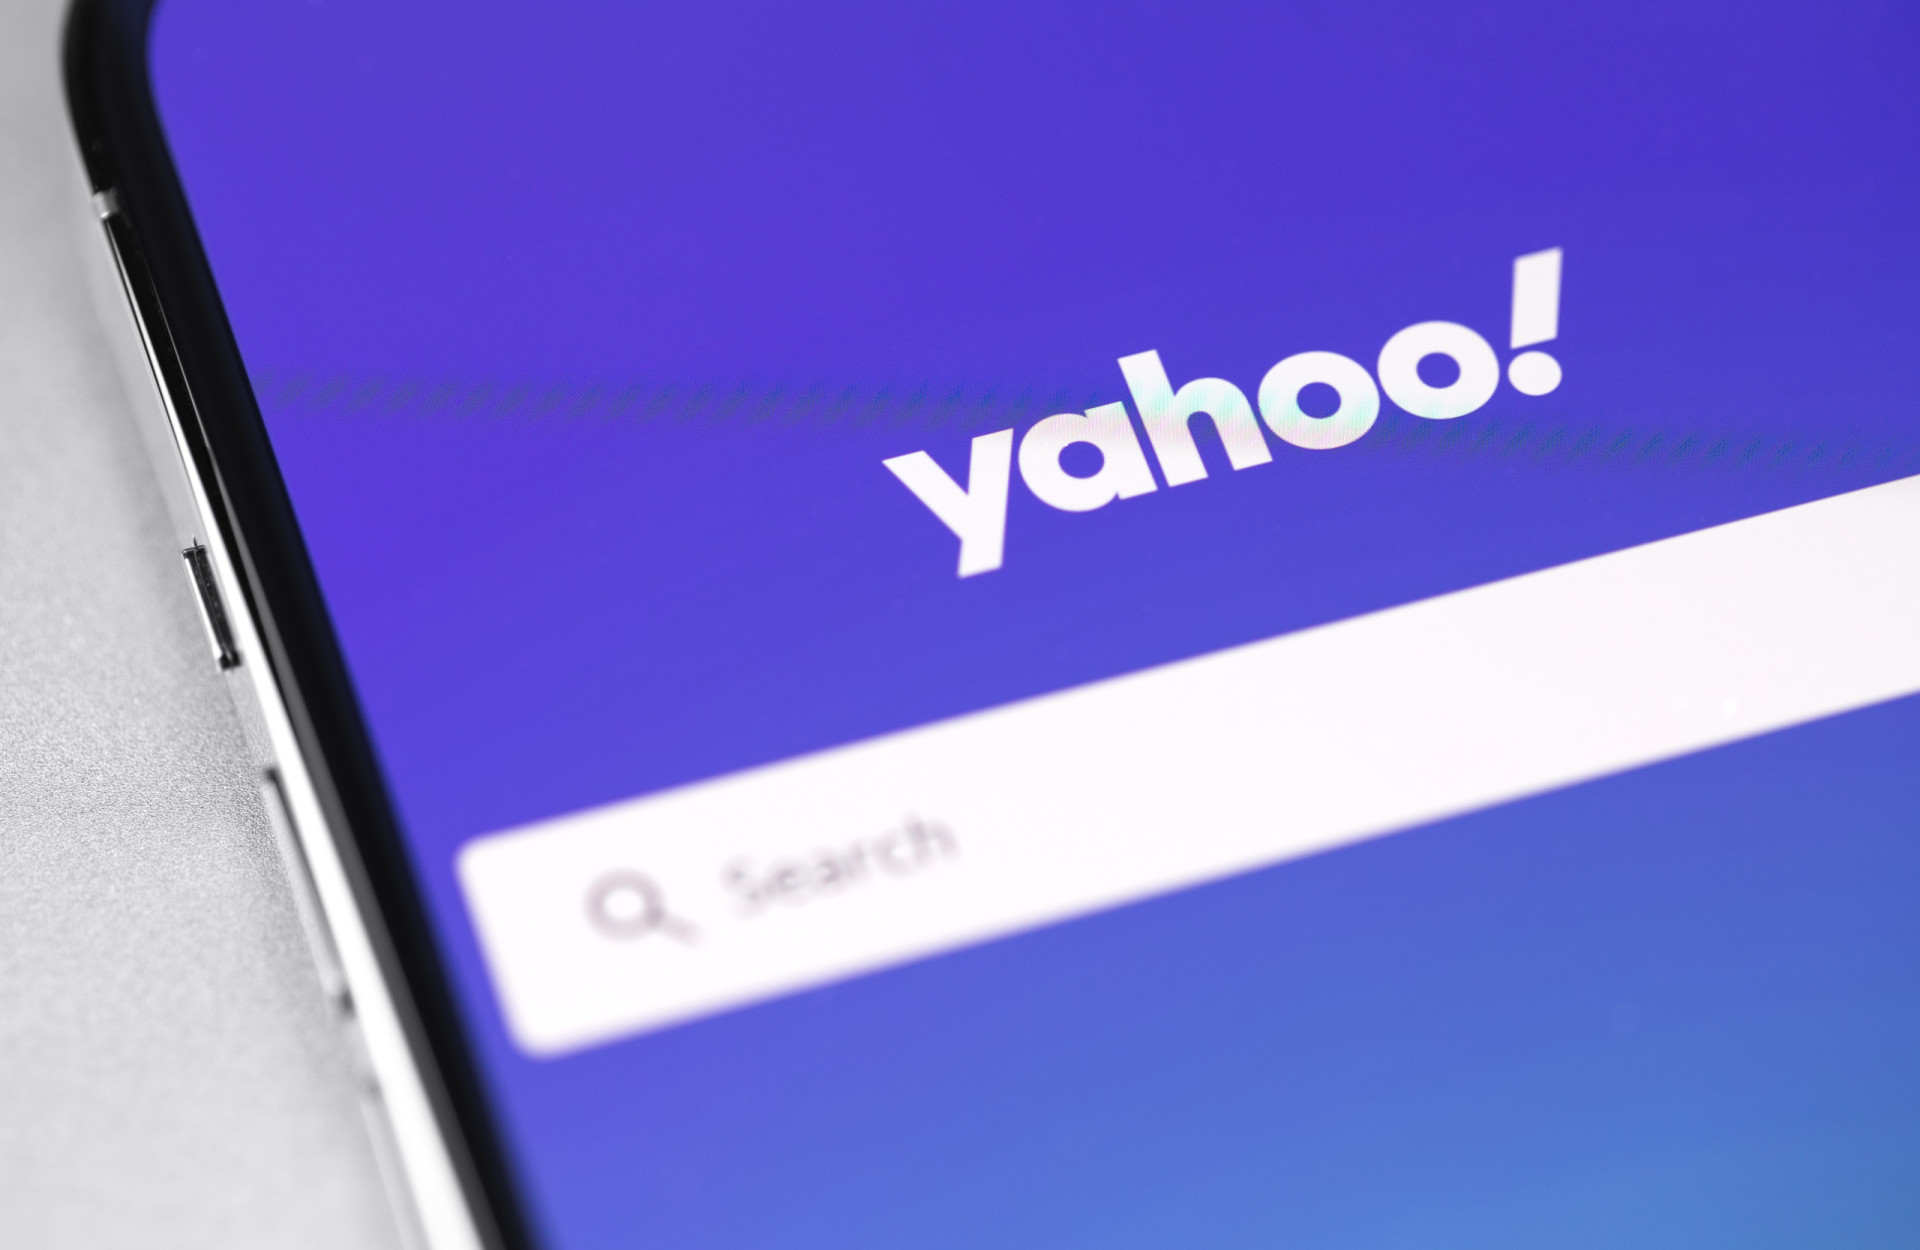 <p>You probably wouldn't have guessed this, but Yahoo! stands for "Yet Another Hierarchically Organized Oracle."</p><p>You may also like:<a href="https://www.starsinsider.com/n/345762?utm_source=msn.com&utm_medium=display&utm_campaign=referral_description&utm_content=537630en-ae"> The craziest souvenirs actors have taken from set </a></p>